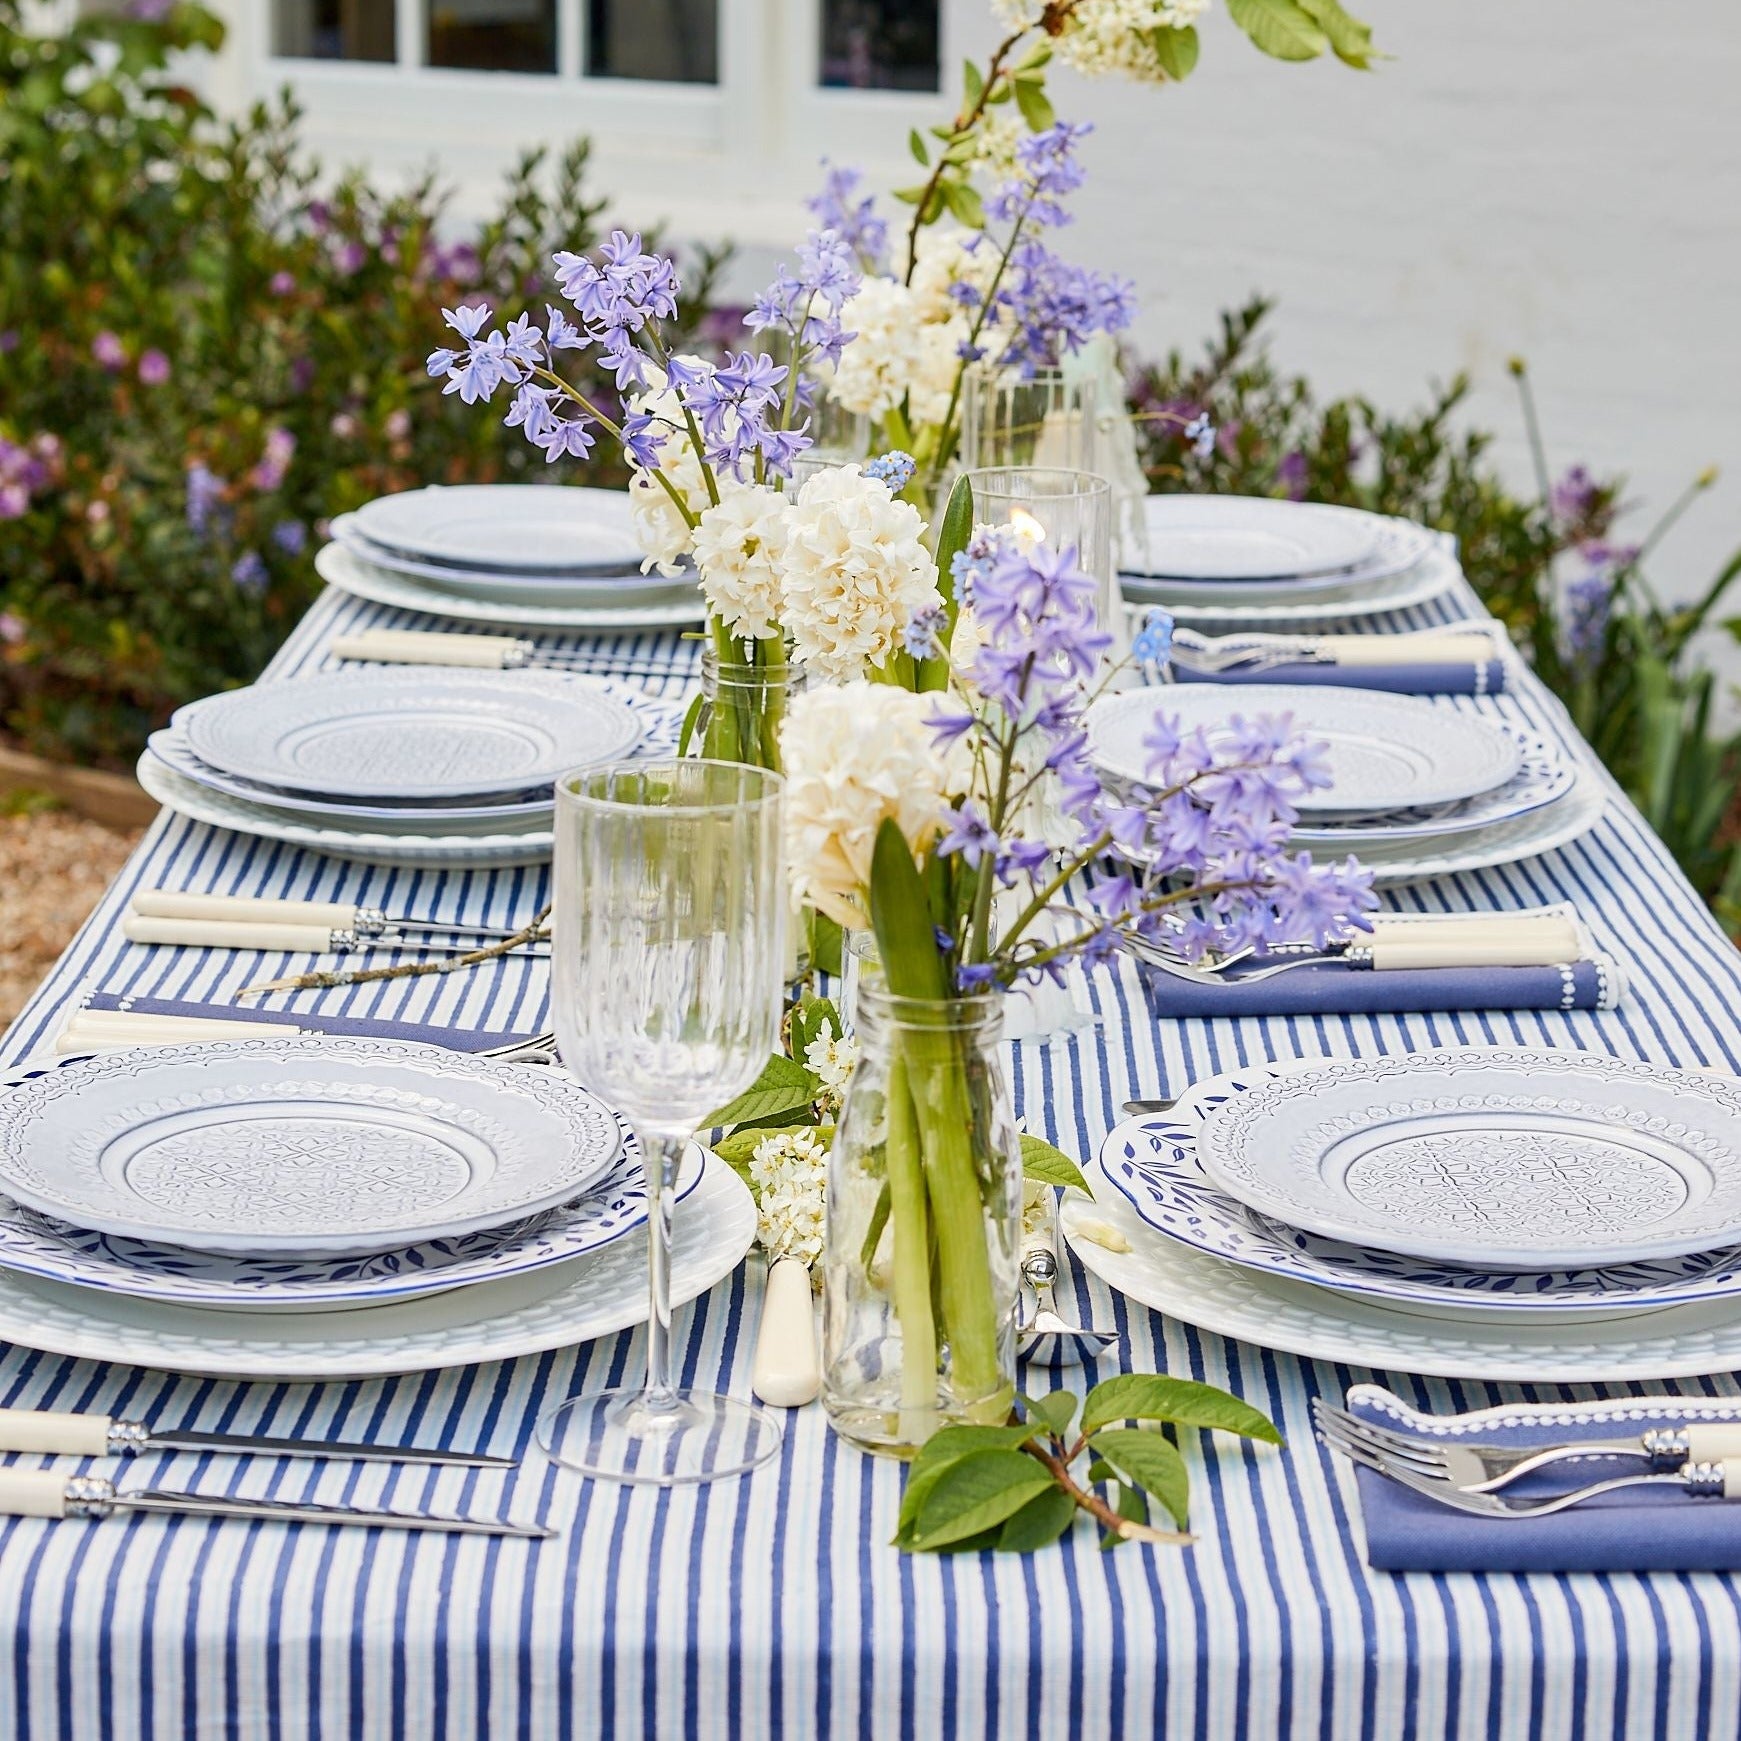 The Padstow stripes - Tablecloth